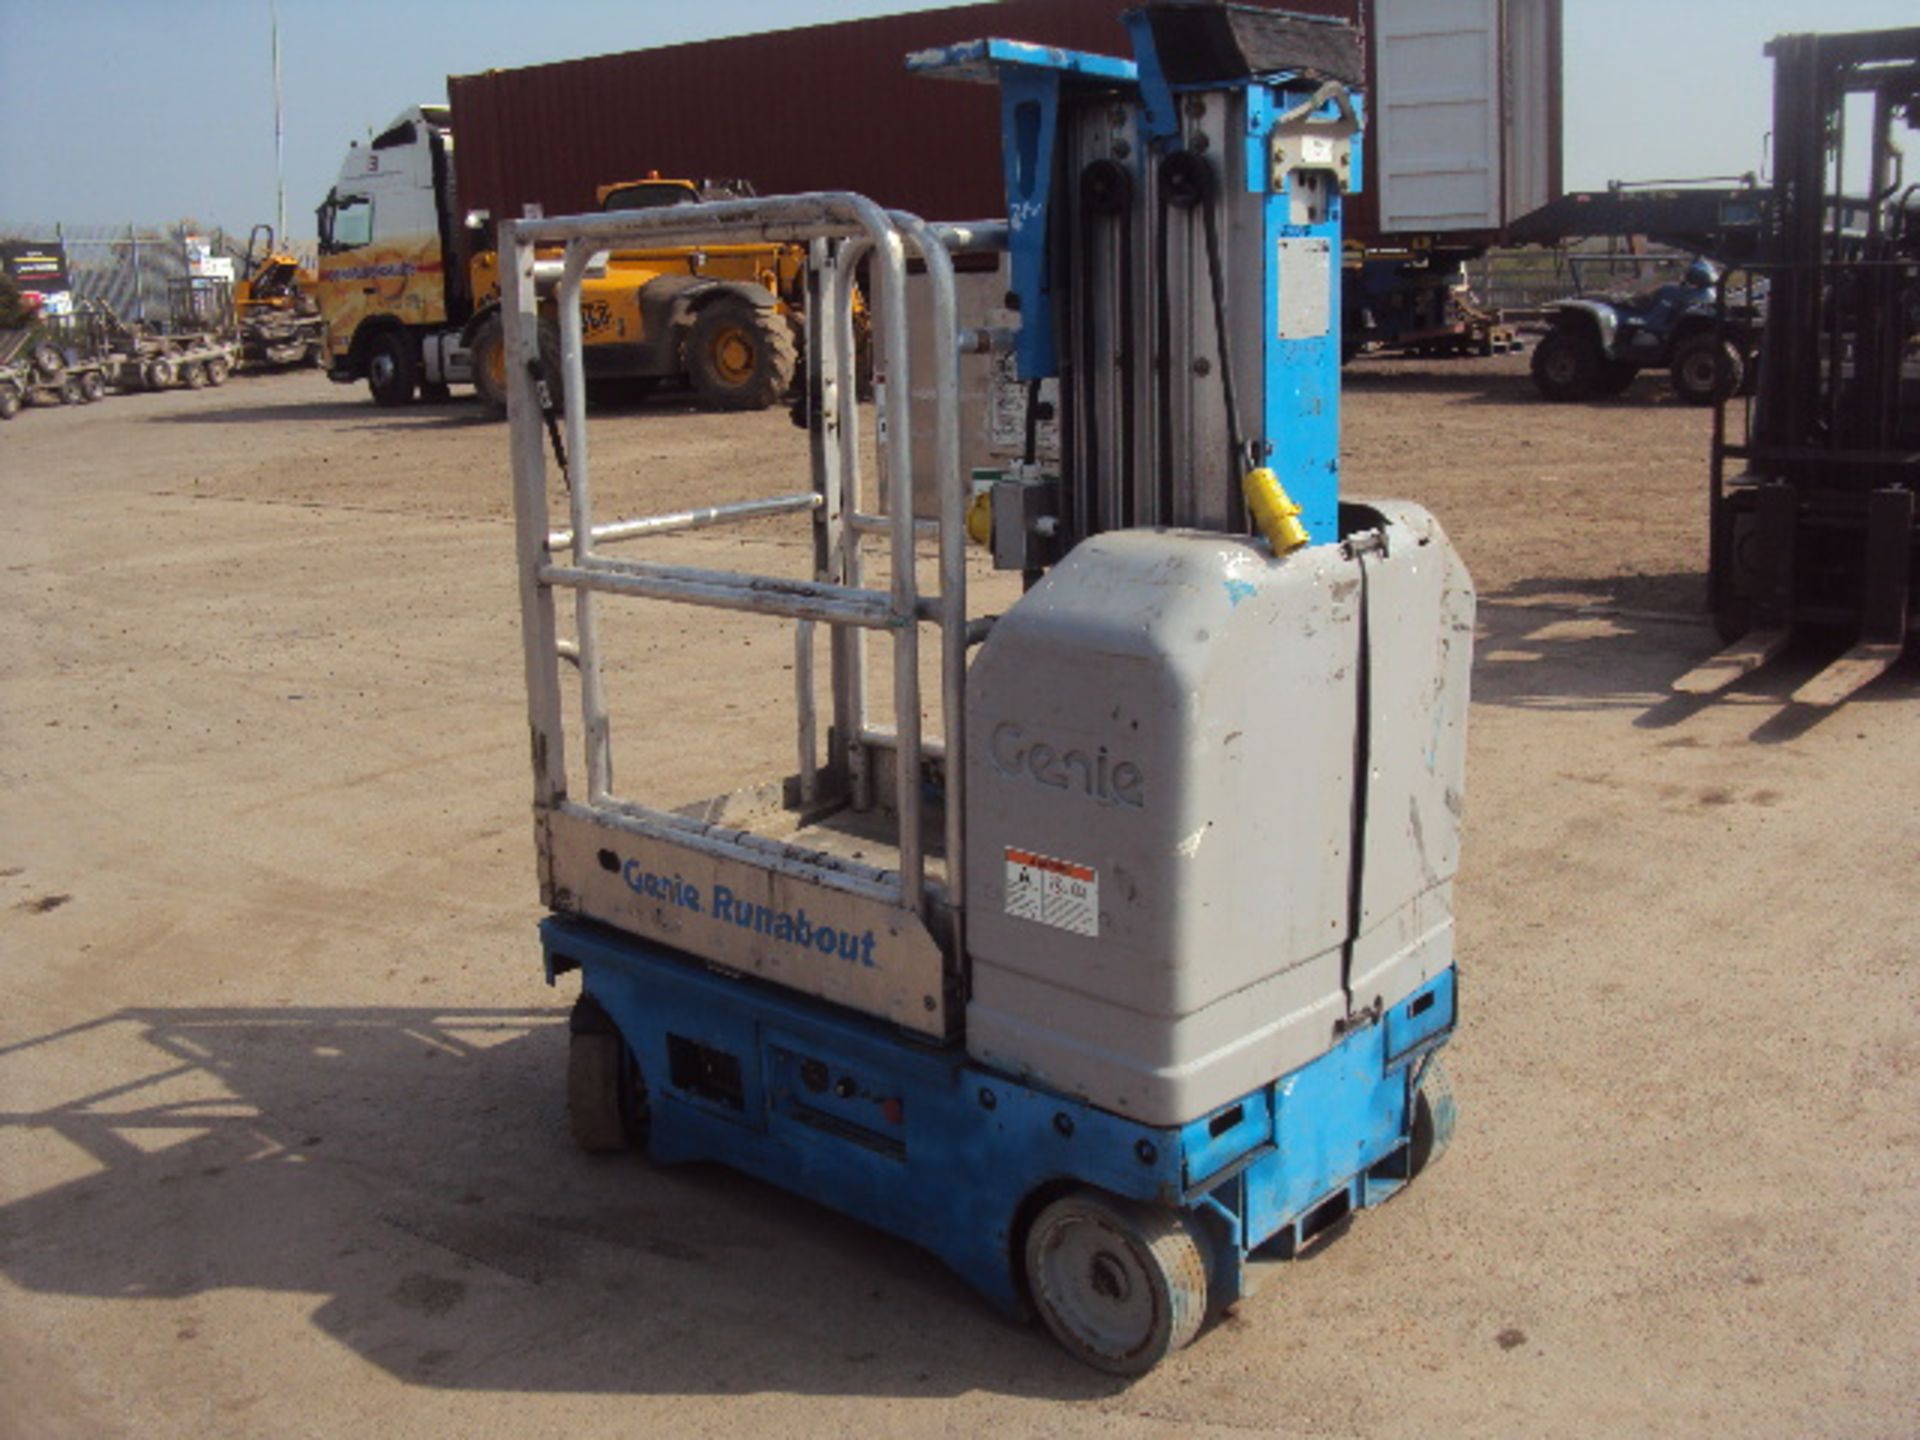 2001 GENIE GR15 Runabout battery driven vertical man-lift (RDL) - Image 3 of 7